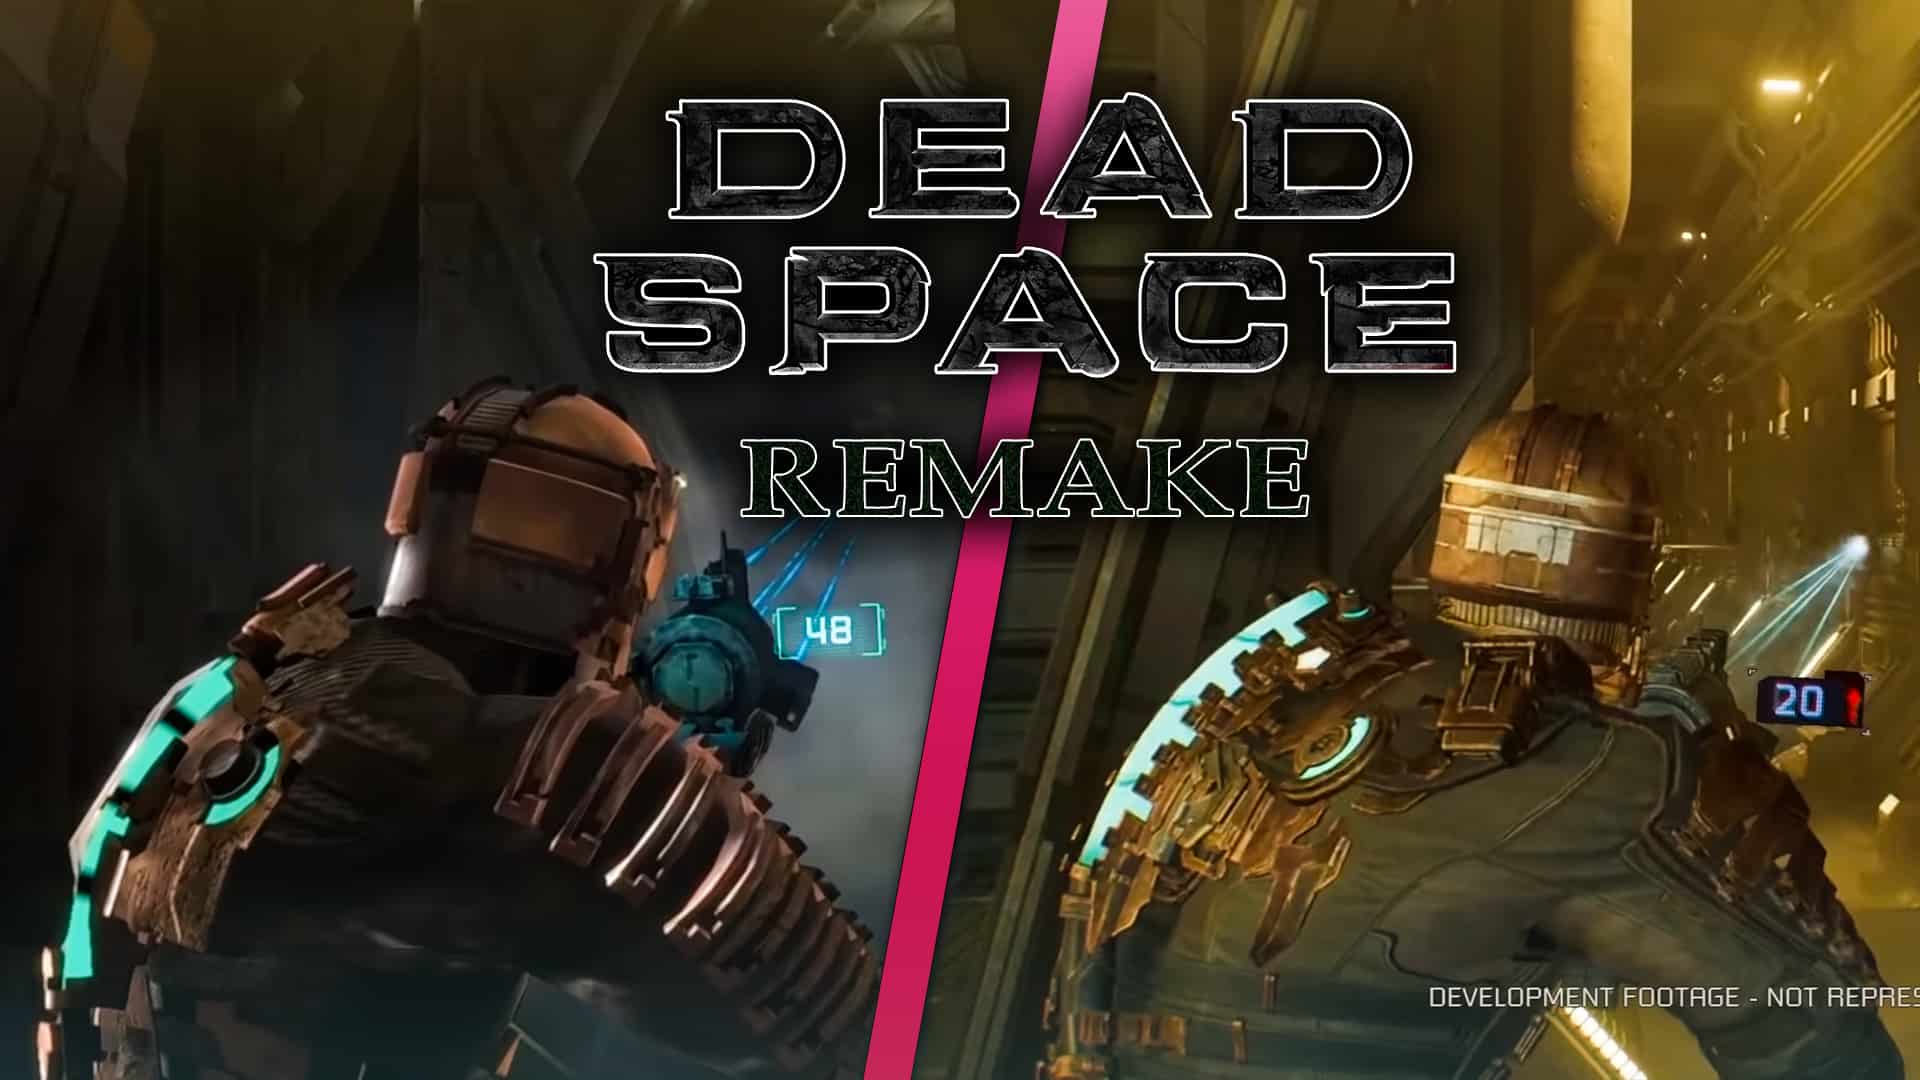 Dead Space Remake Team is aiming for a 2023 release date